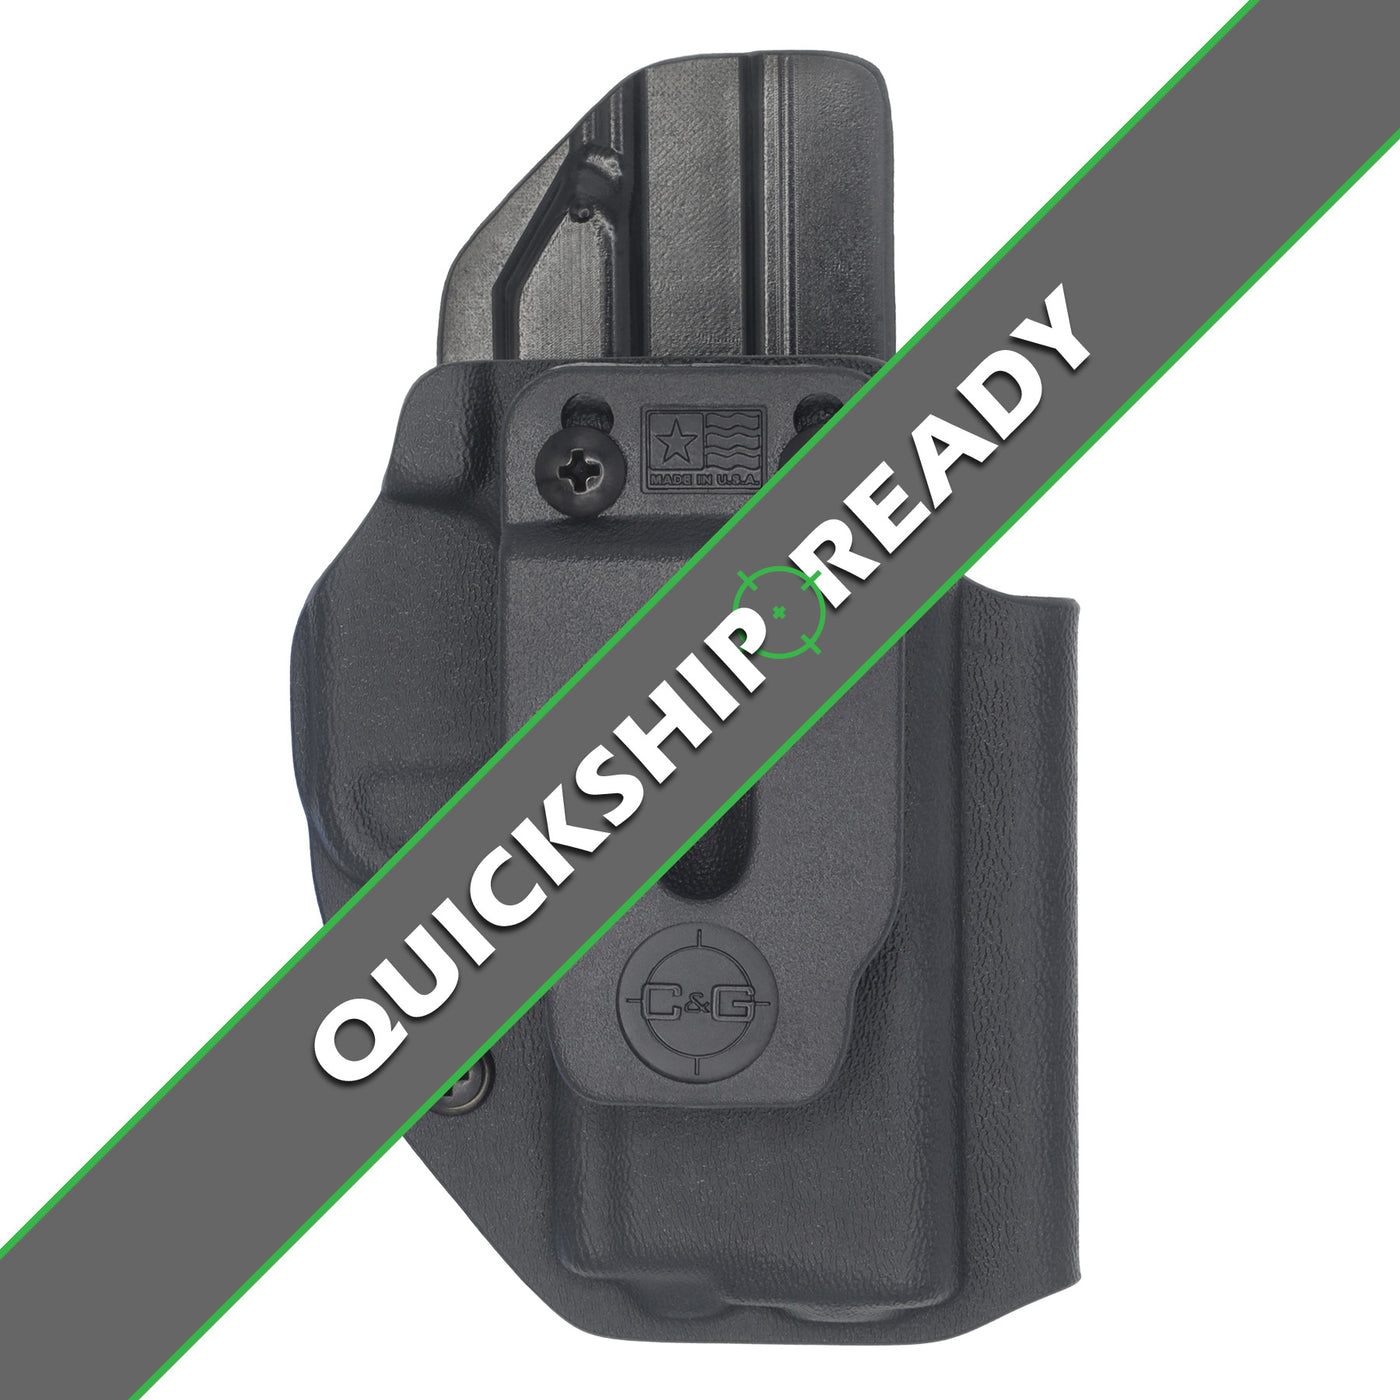 C&G Holsters quick ship Covert IWB kydex holster for Springfield Xds 3.3 inch with quick ship overlay